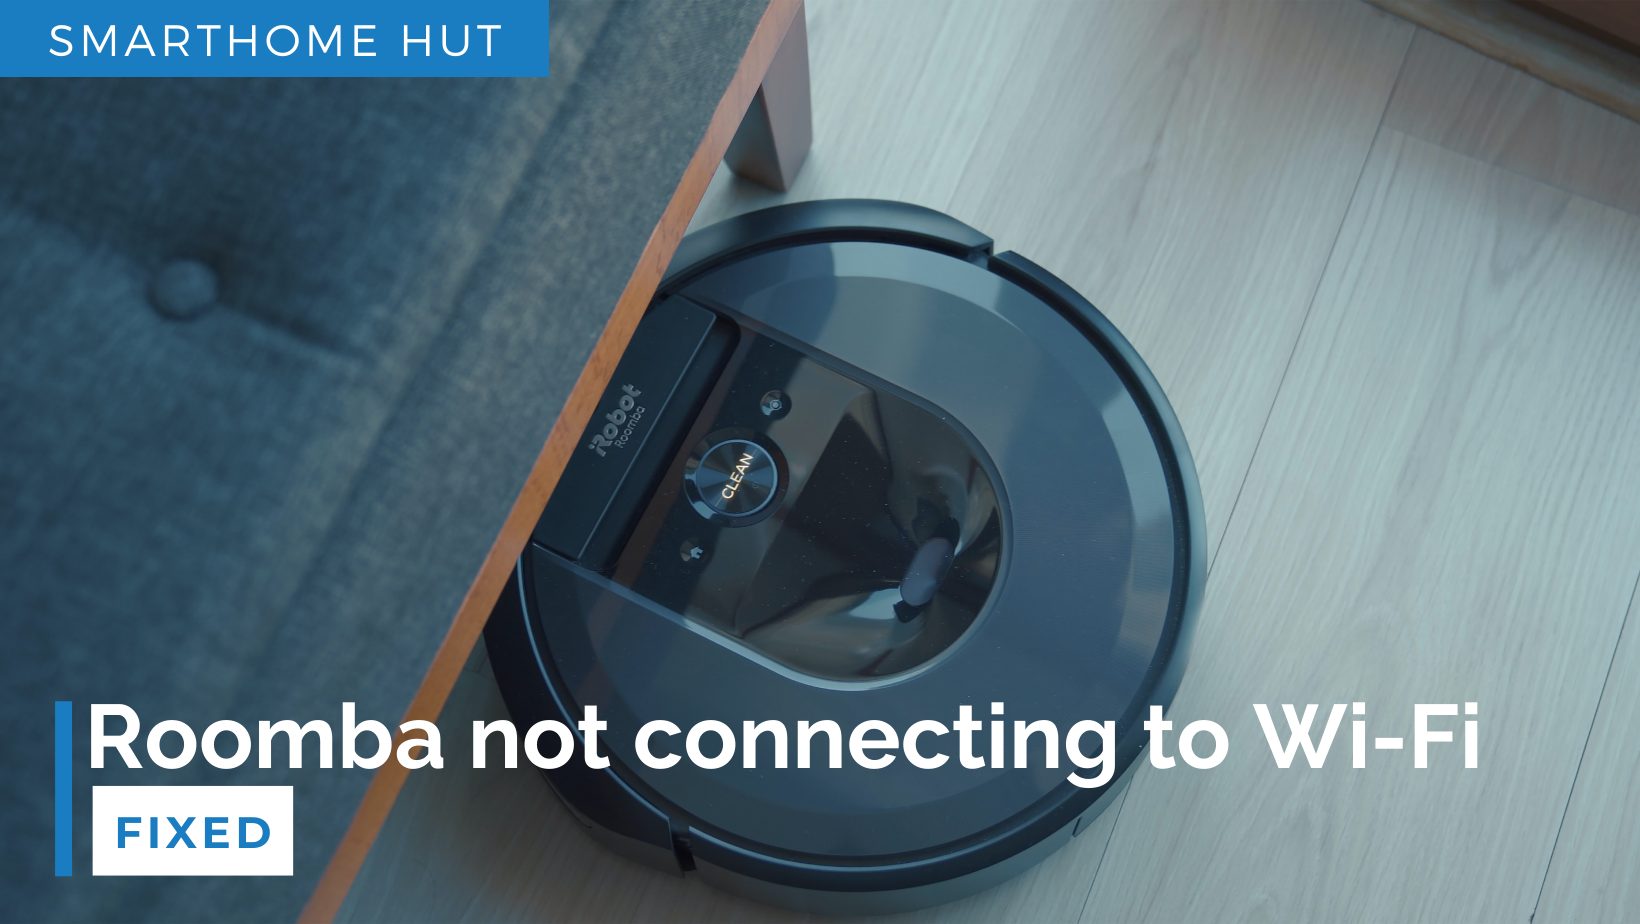 Roomba not connecting to WiFi